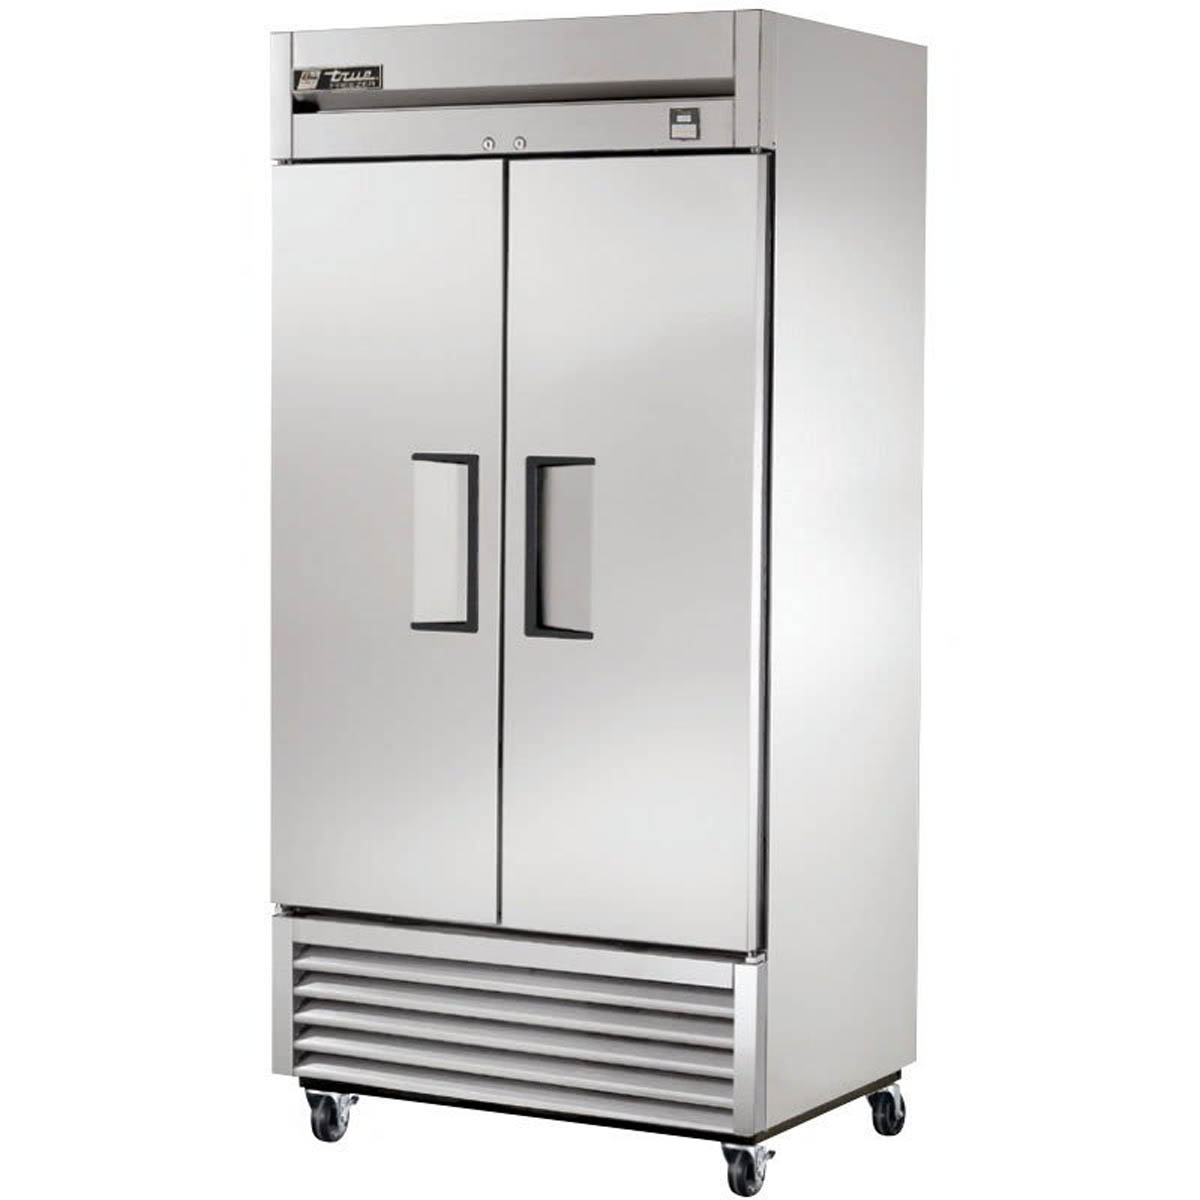 True TS-35F-HC 39″ Two Section Reach-In Solid Swing Door Stainless Steel Freezer, 35 Cu. Ft.